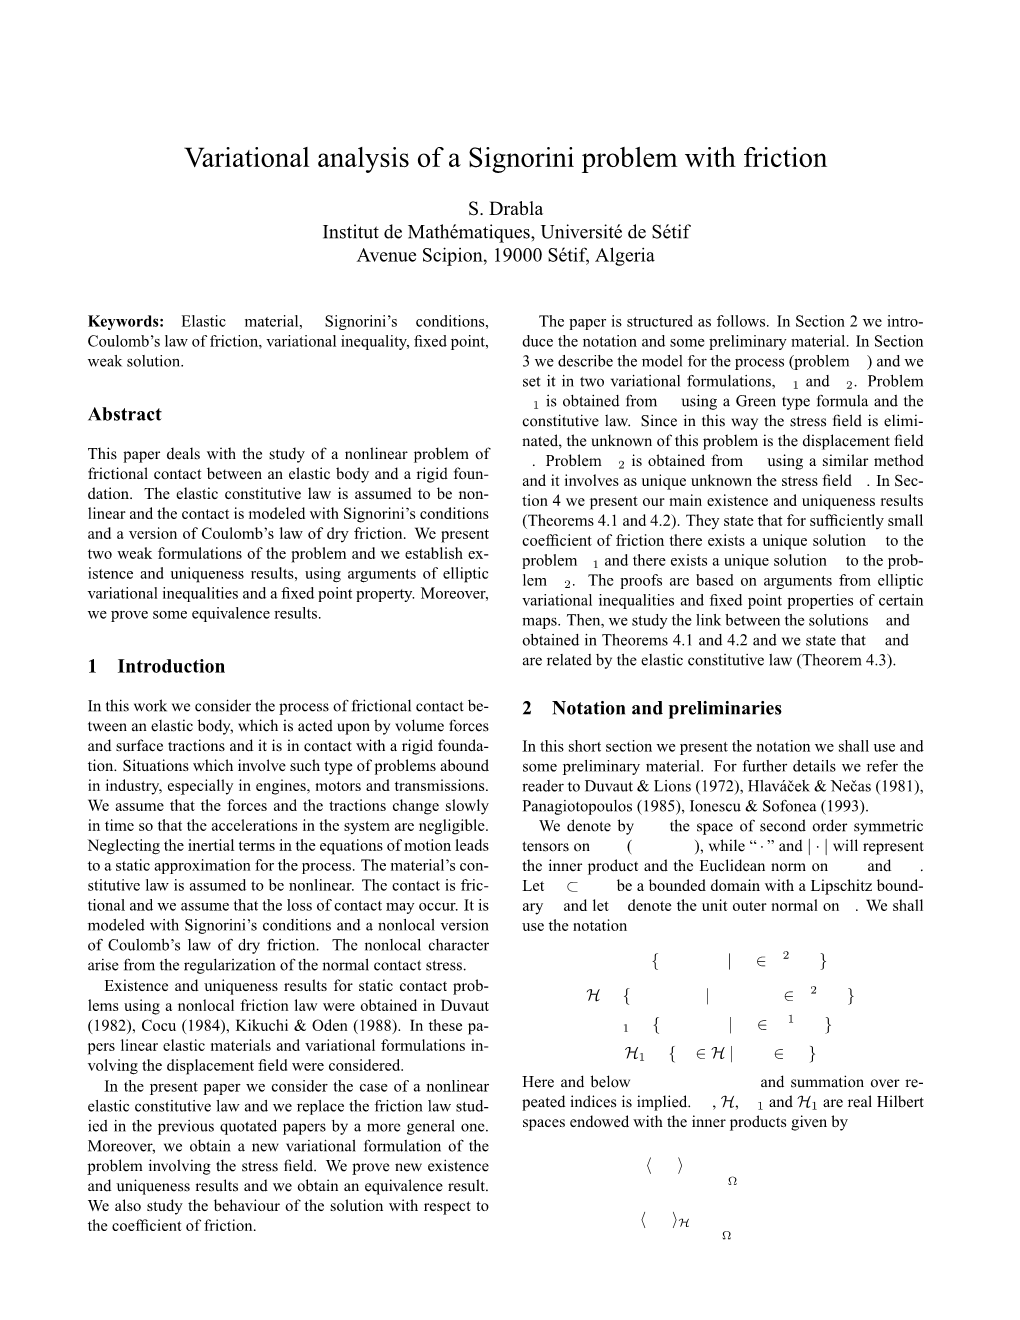 Variational Analysis of a Signorini Problem with Friction